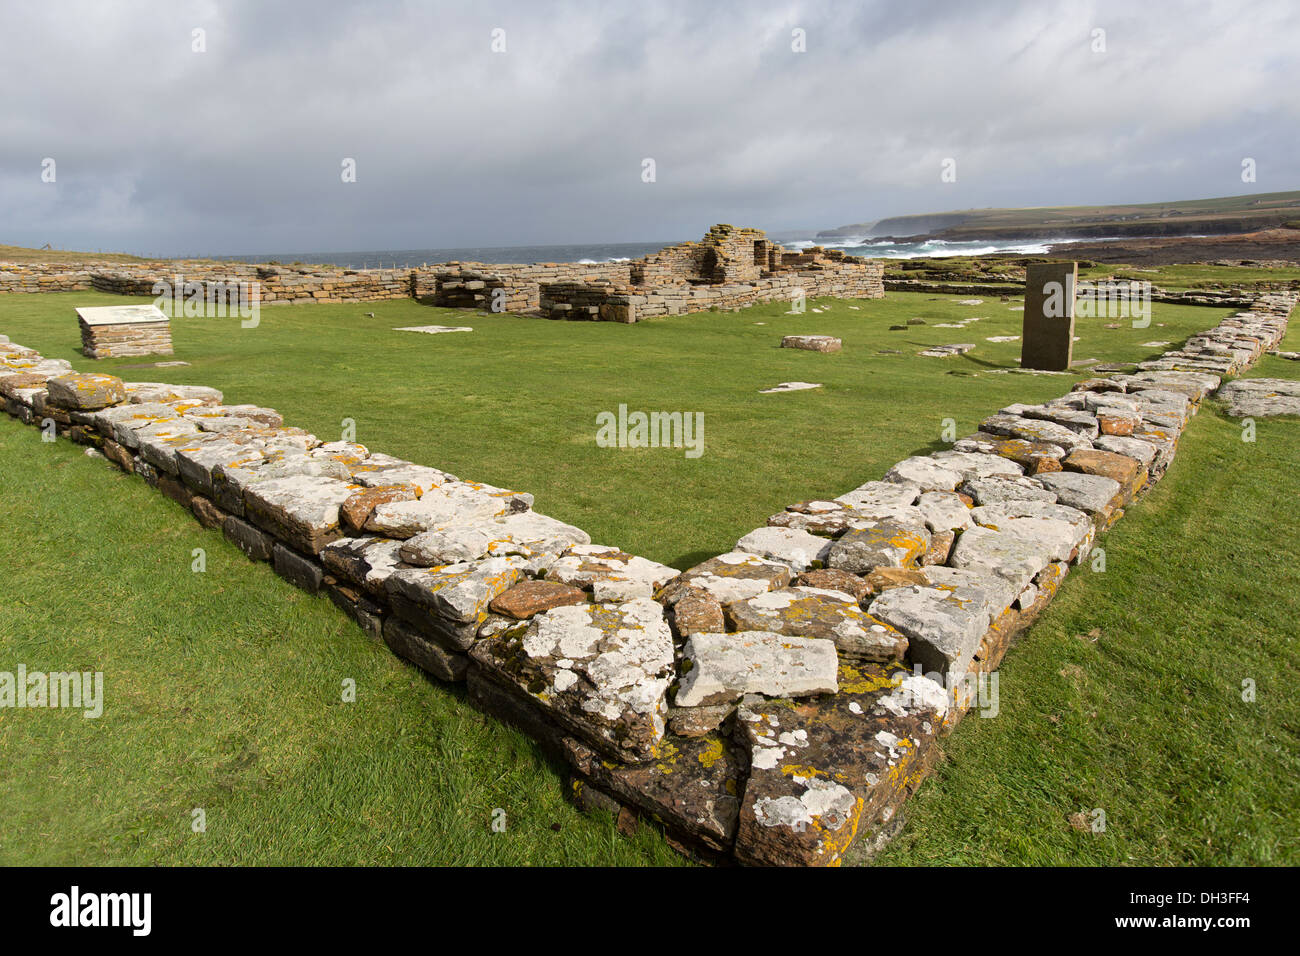 Islands of Orkney, Scotland. Picturesque view of the Burgh of Birsay, with Birsay Bay in the background. Stock Photo